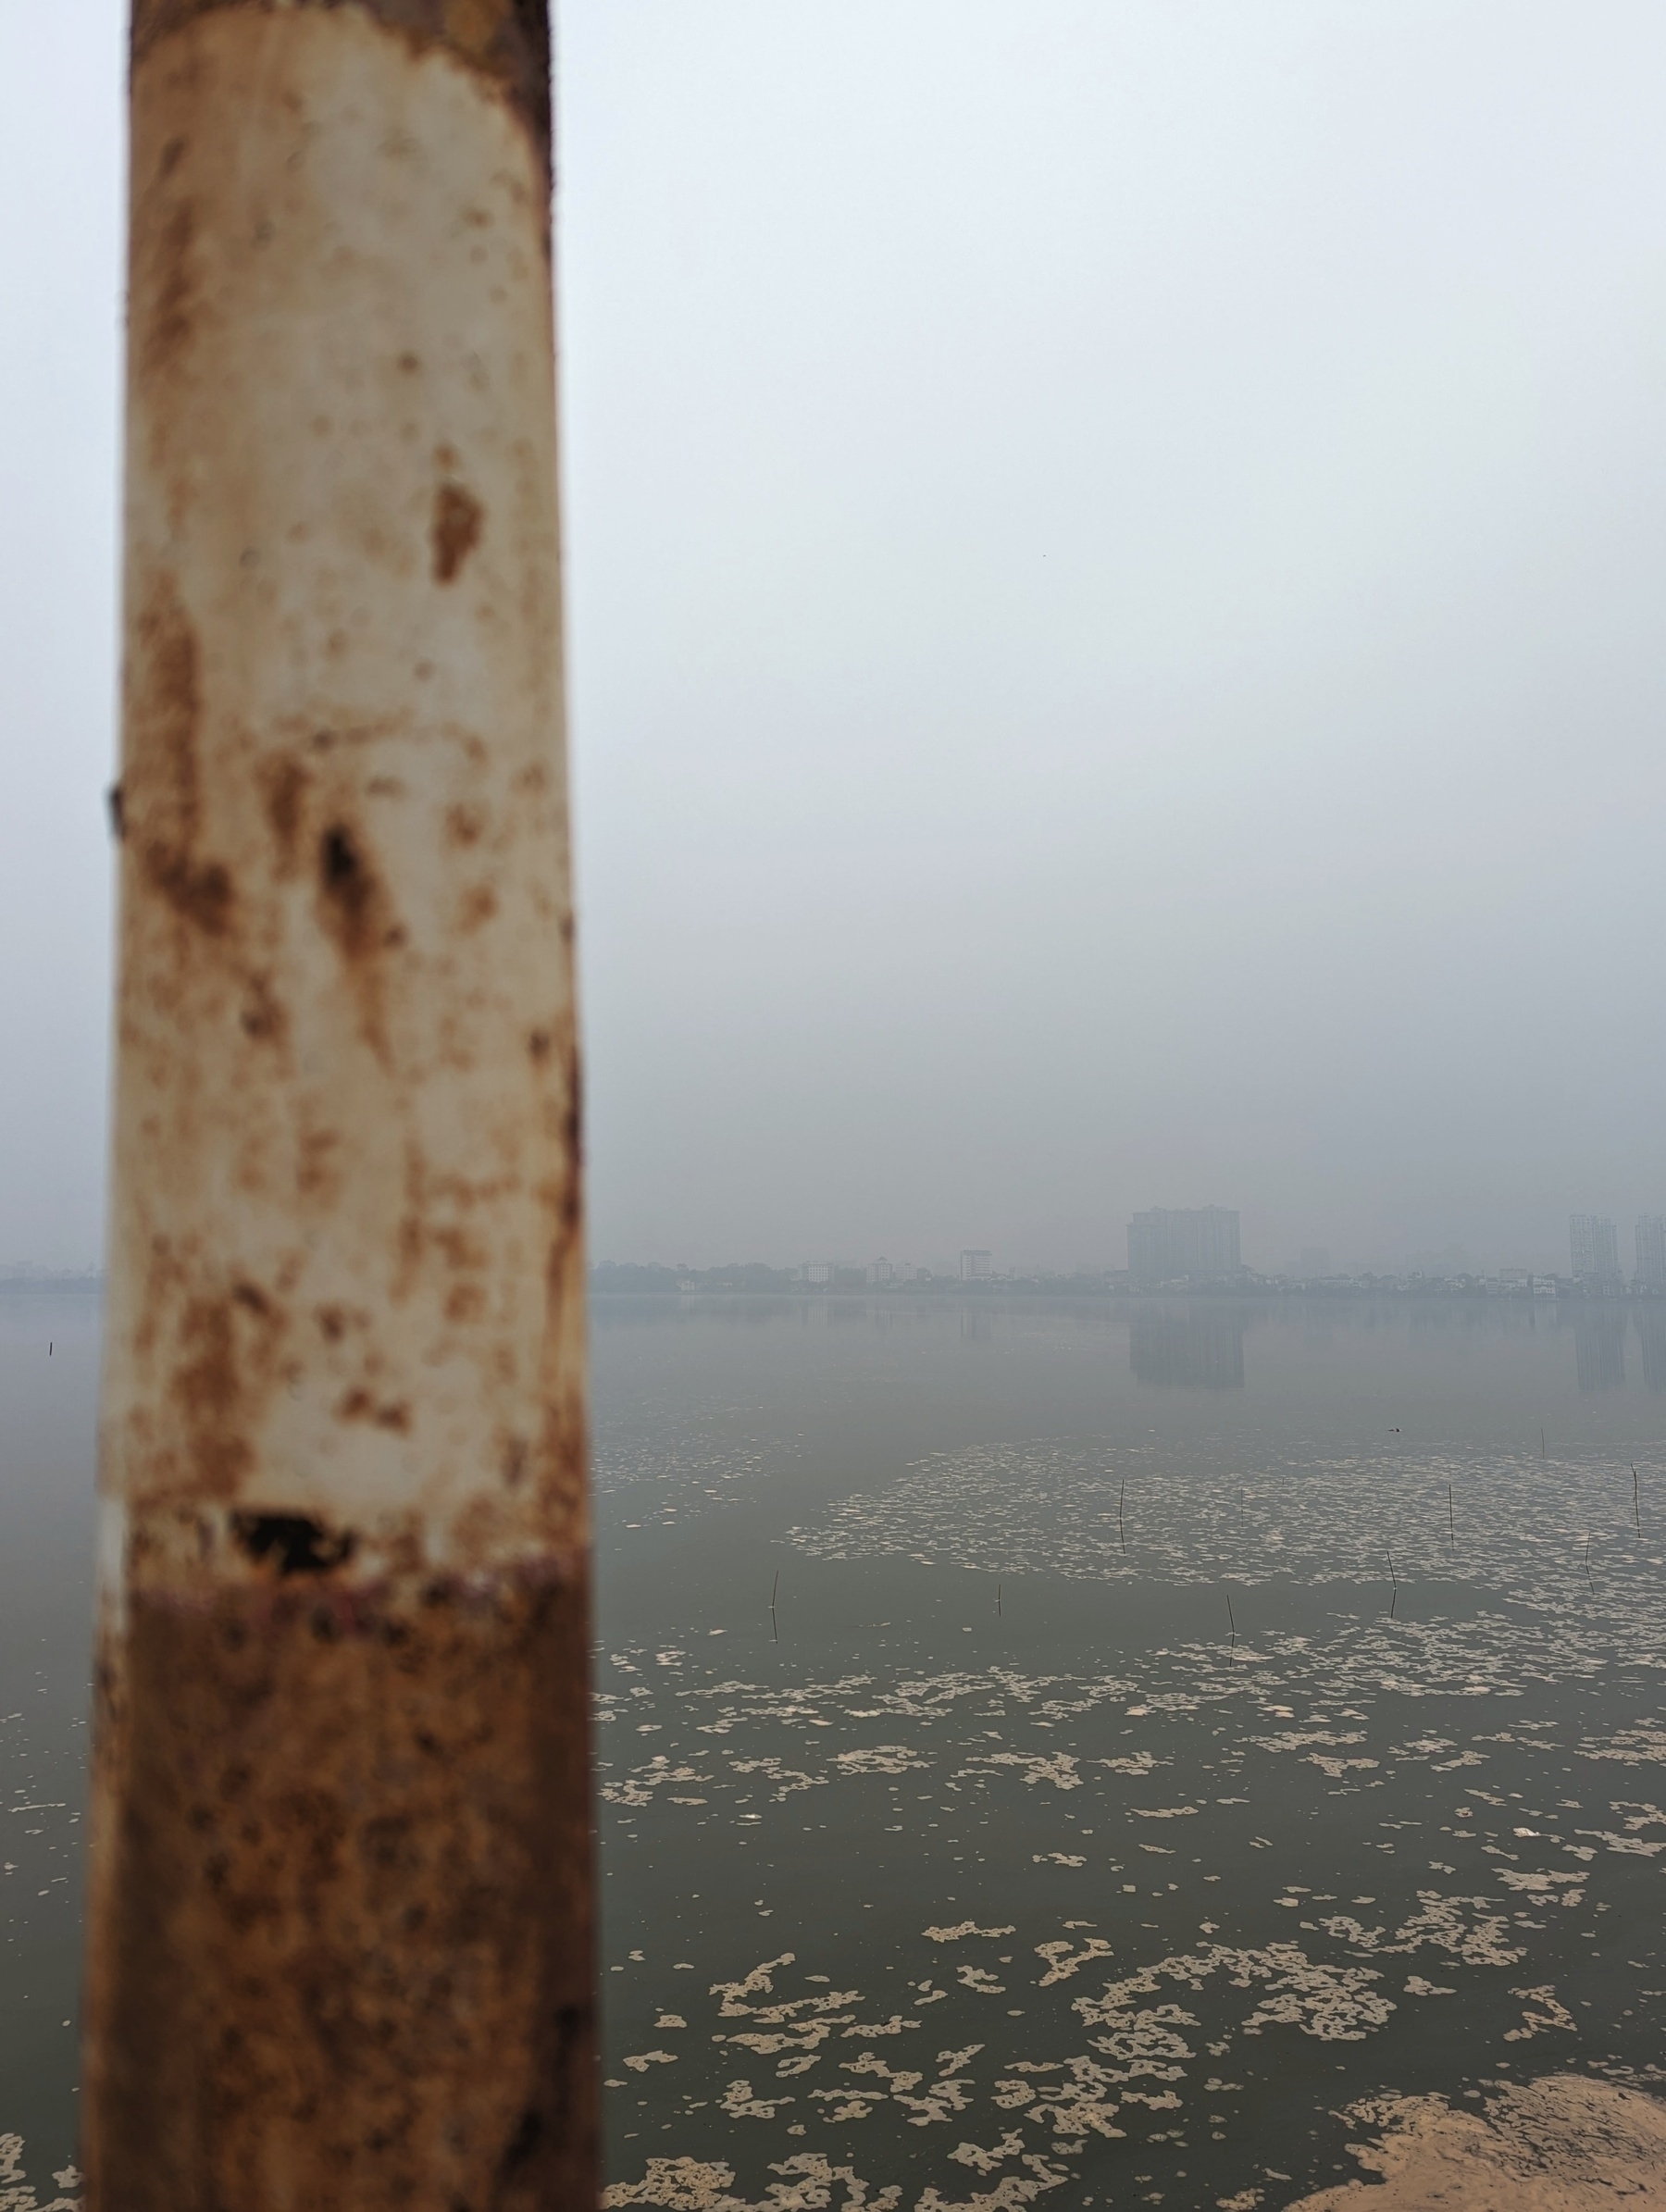 The west Lake in Hanoi in the afternoon. There's construction in the lake thus a bit of sand floating around. Most strikingly, it's foggy. A lot. Just a grey sight. There's a rusty pole on the left, because rust gives a nice aura 